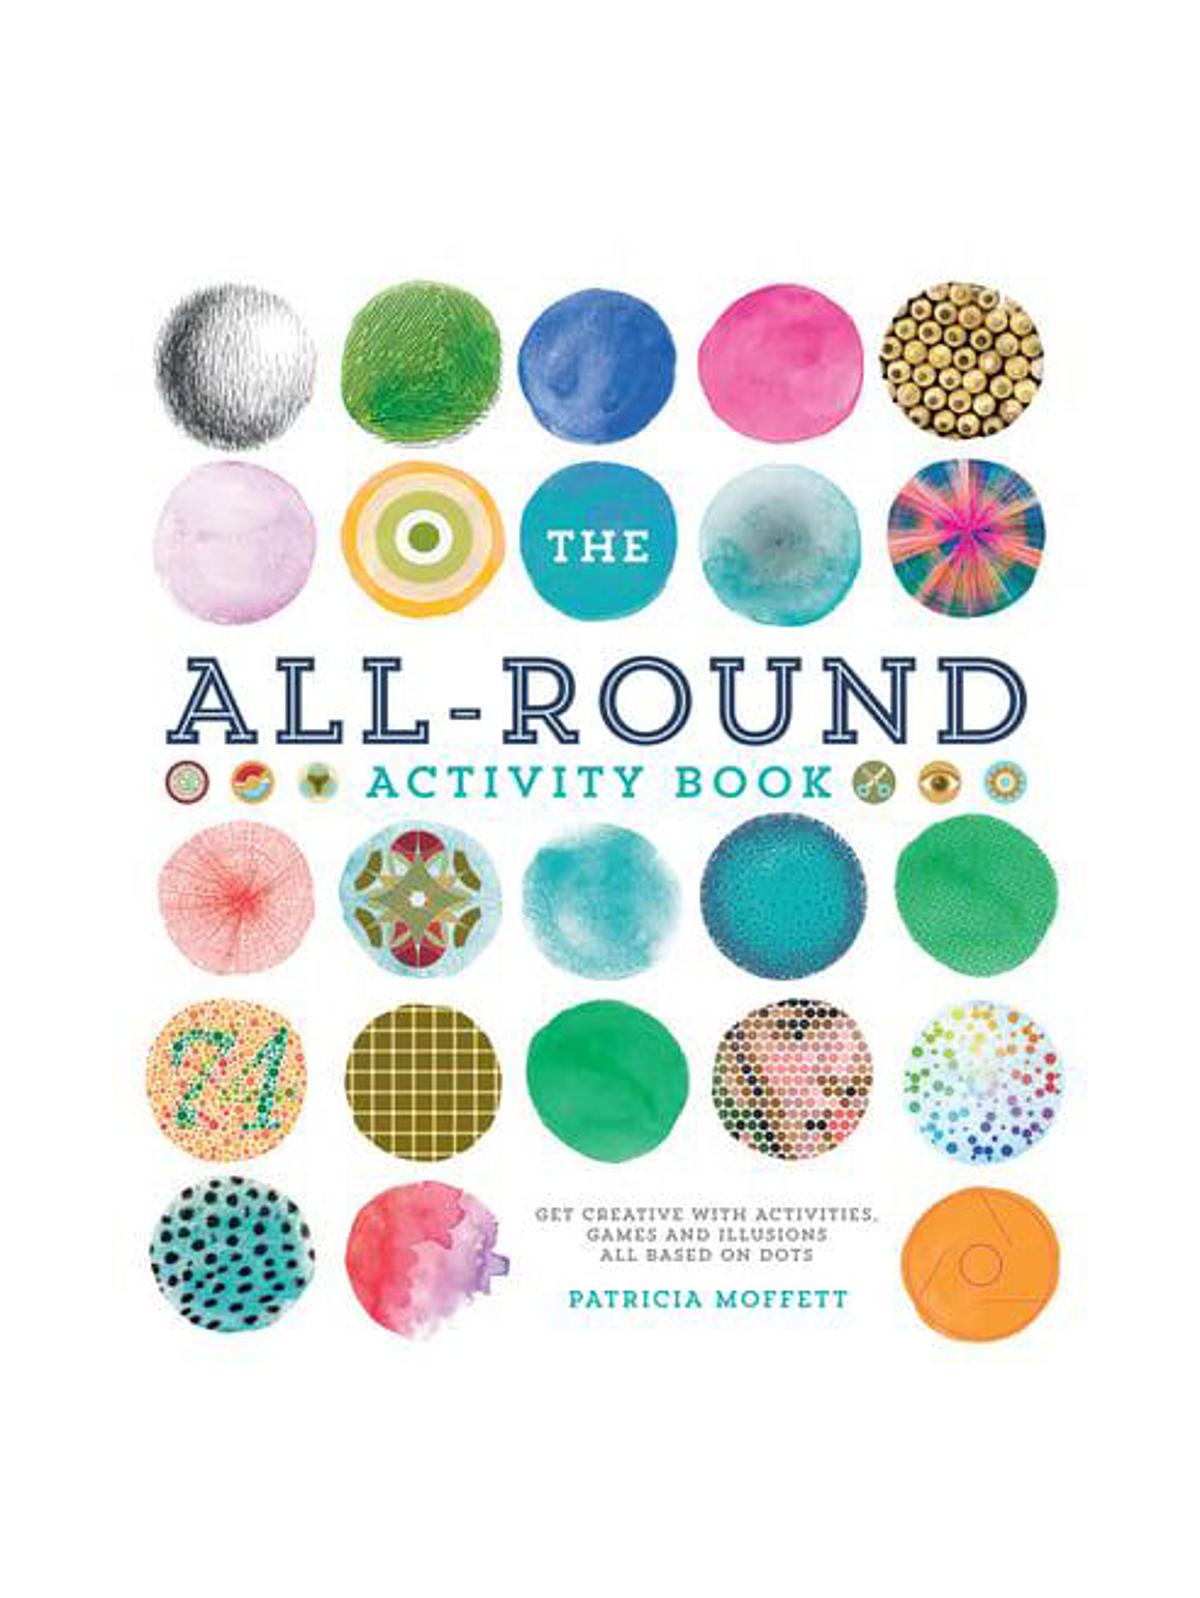 The All-Round Activity Book Each